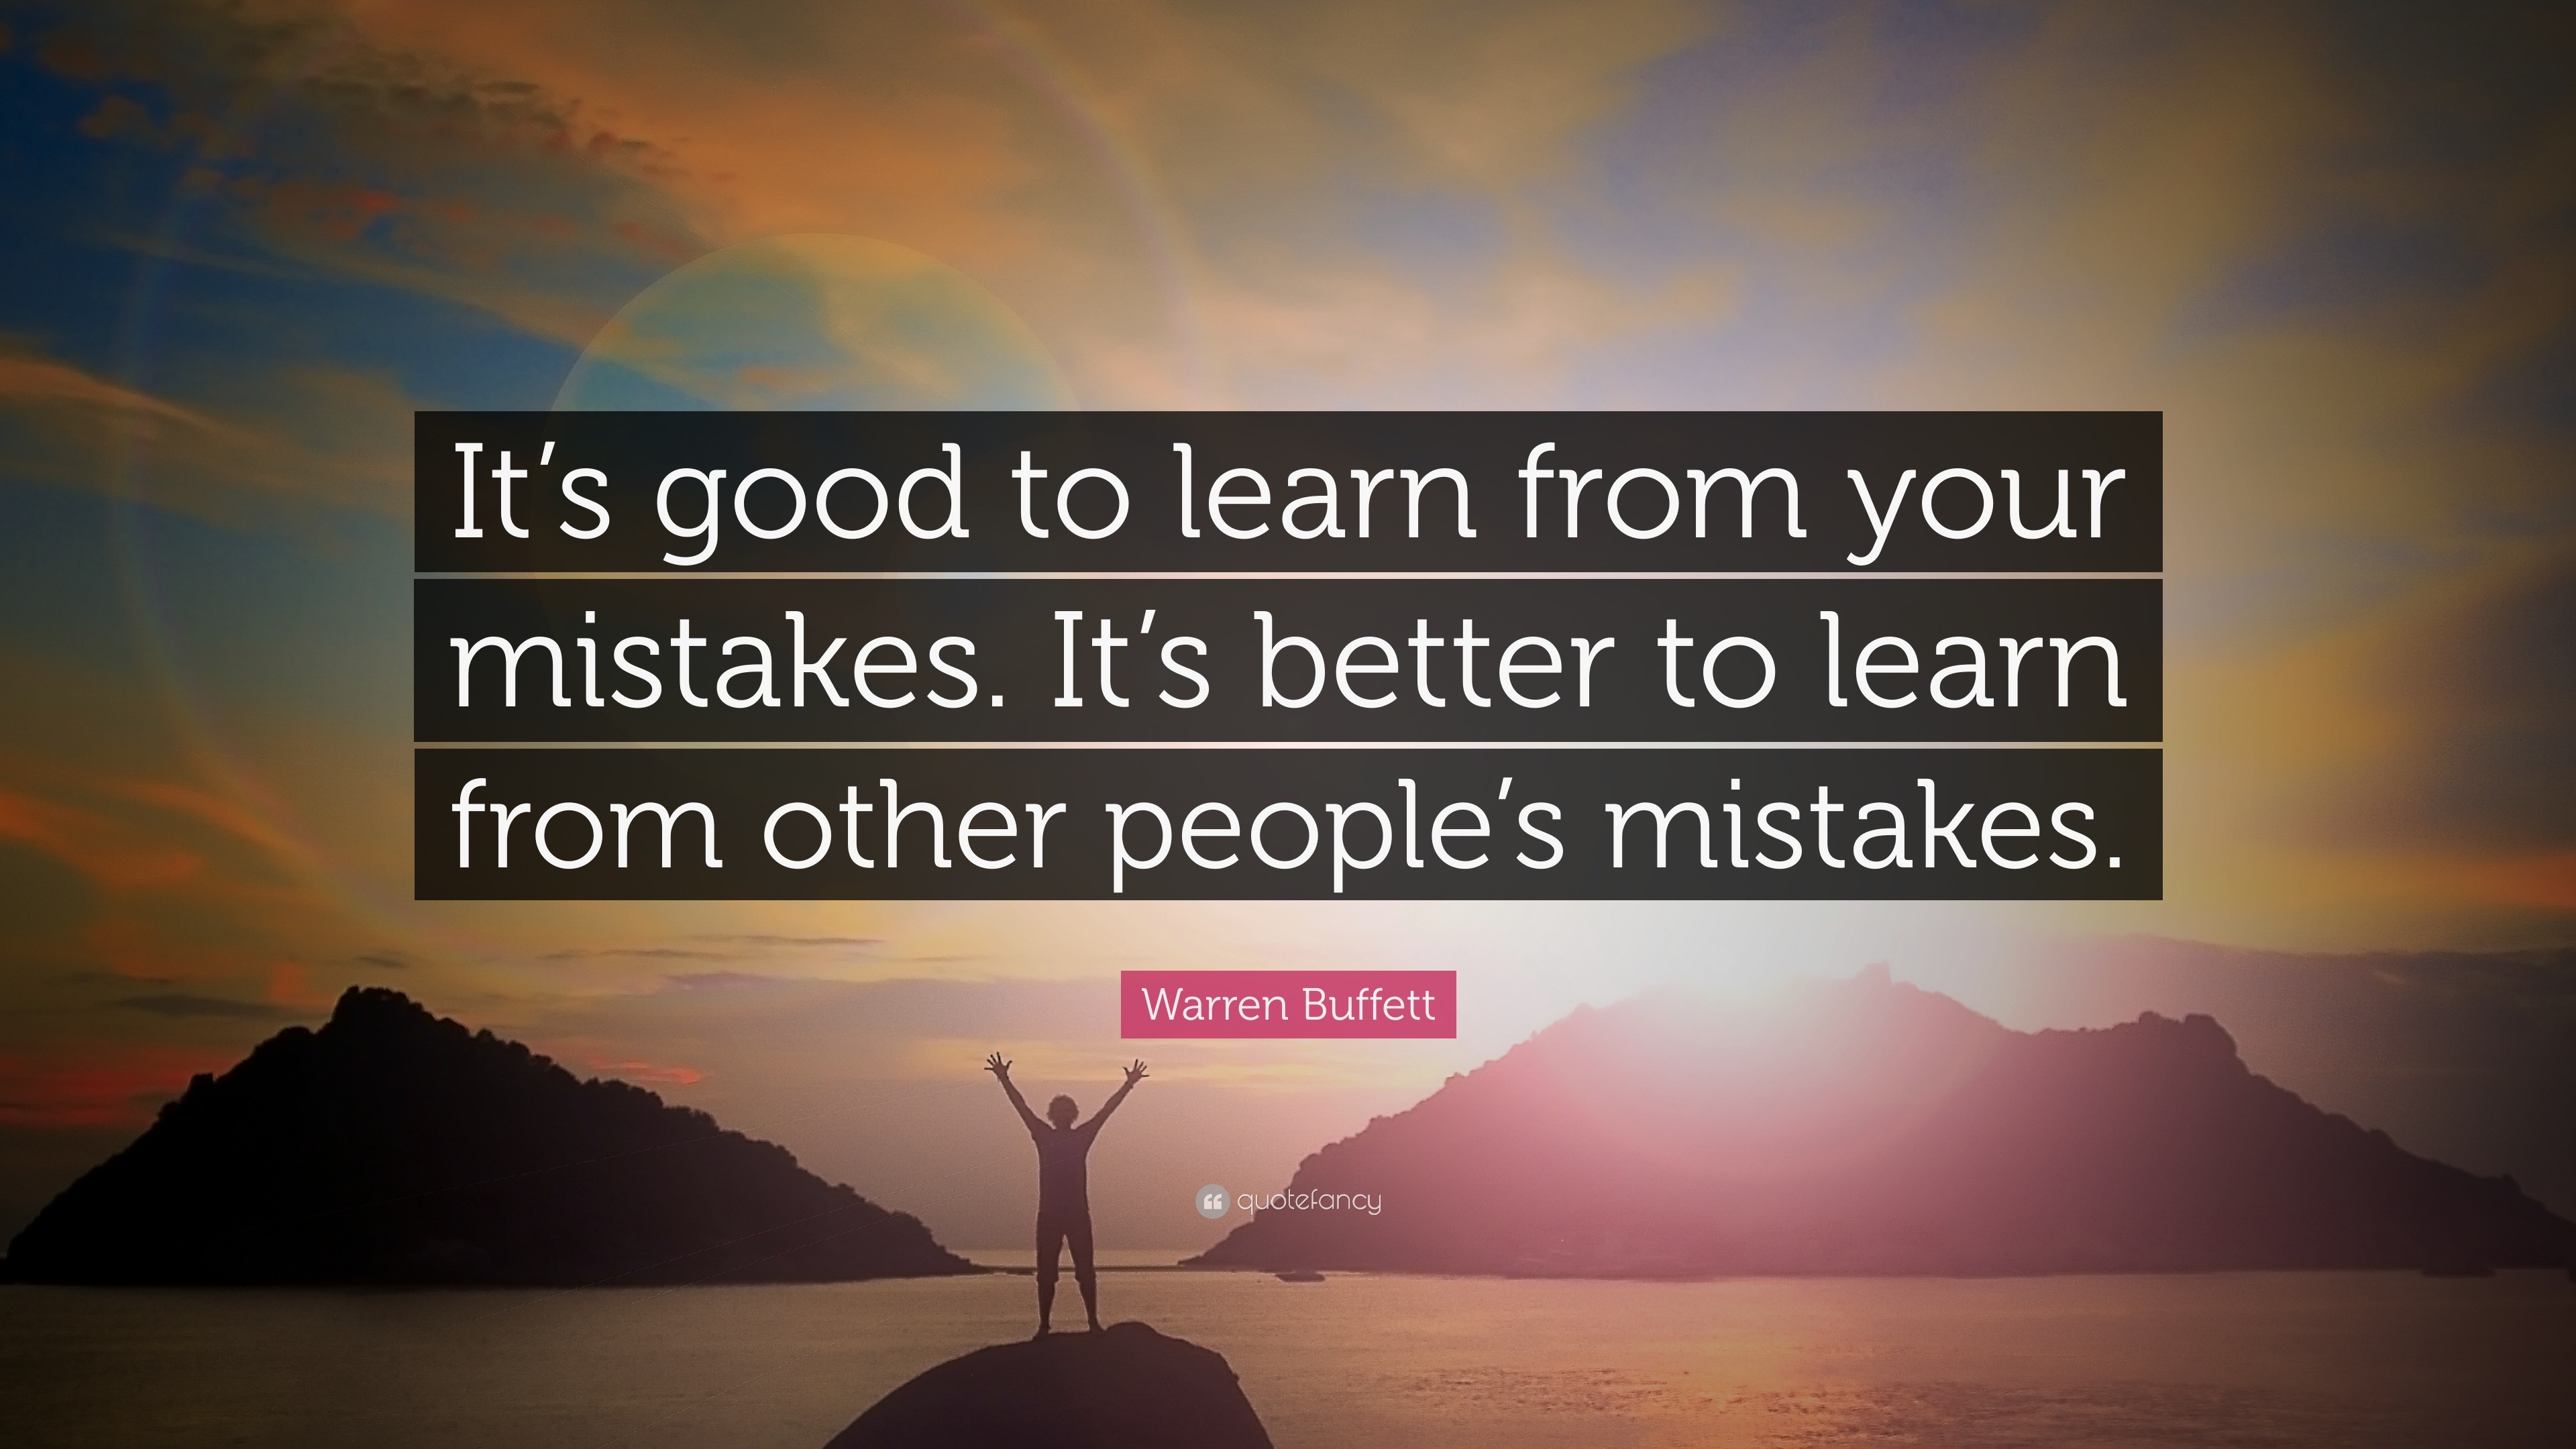 warren-buffett-quote-it-s-good-to-learn-from-your-mistakes-it-s-better-to-learn-from-other